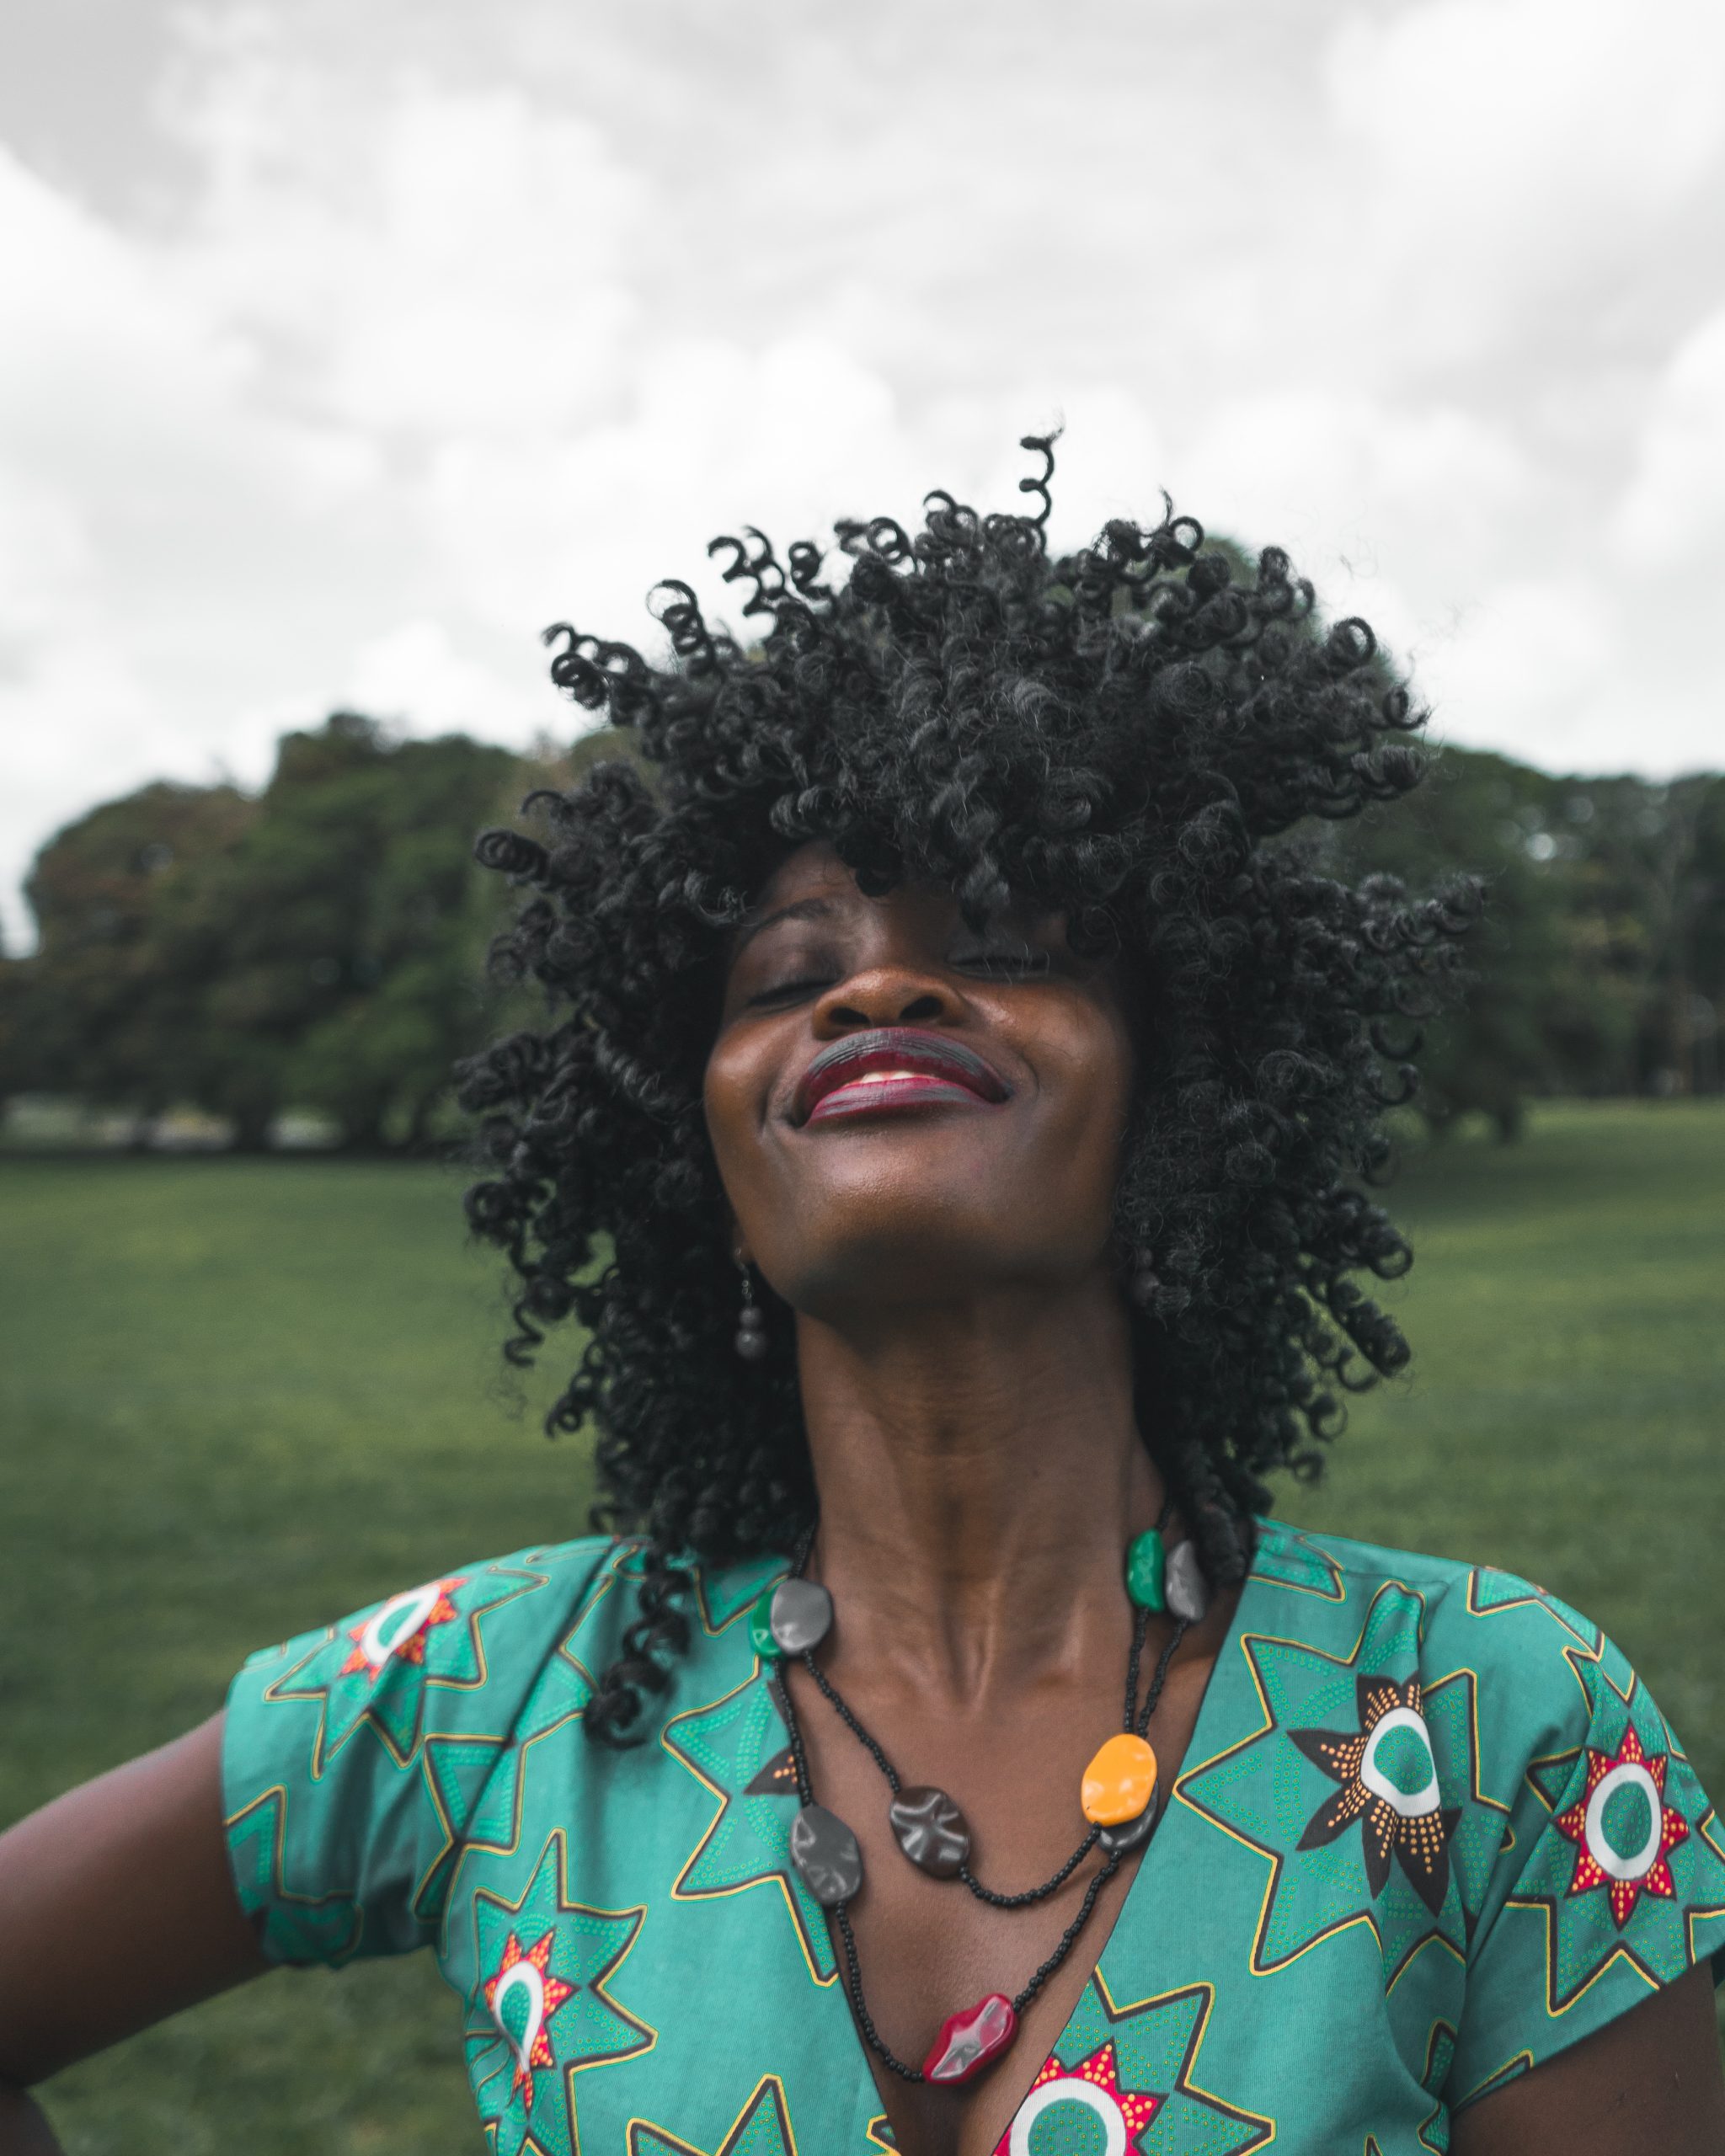 Sustainable Afro Hair Care with Eco Warrior_Little Soap Company